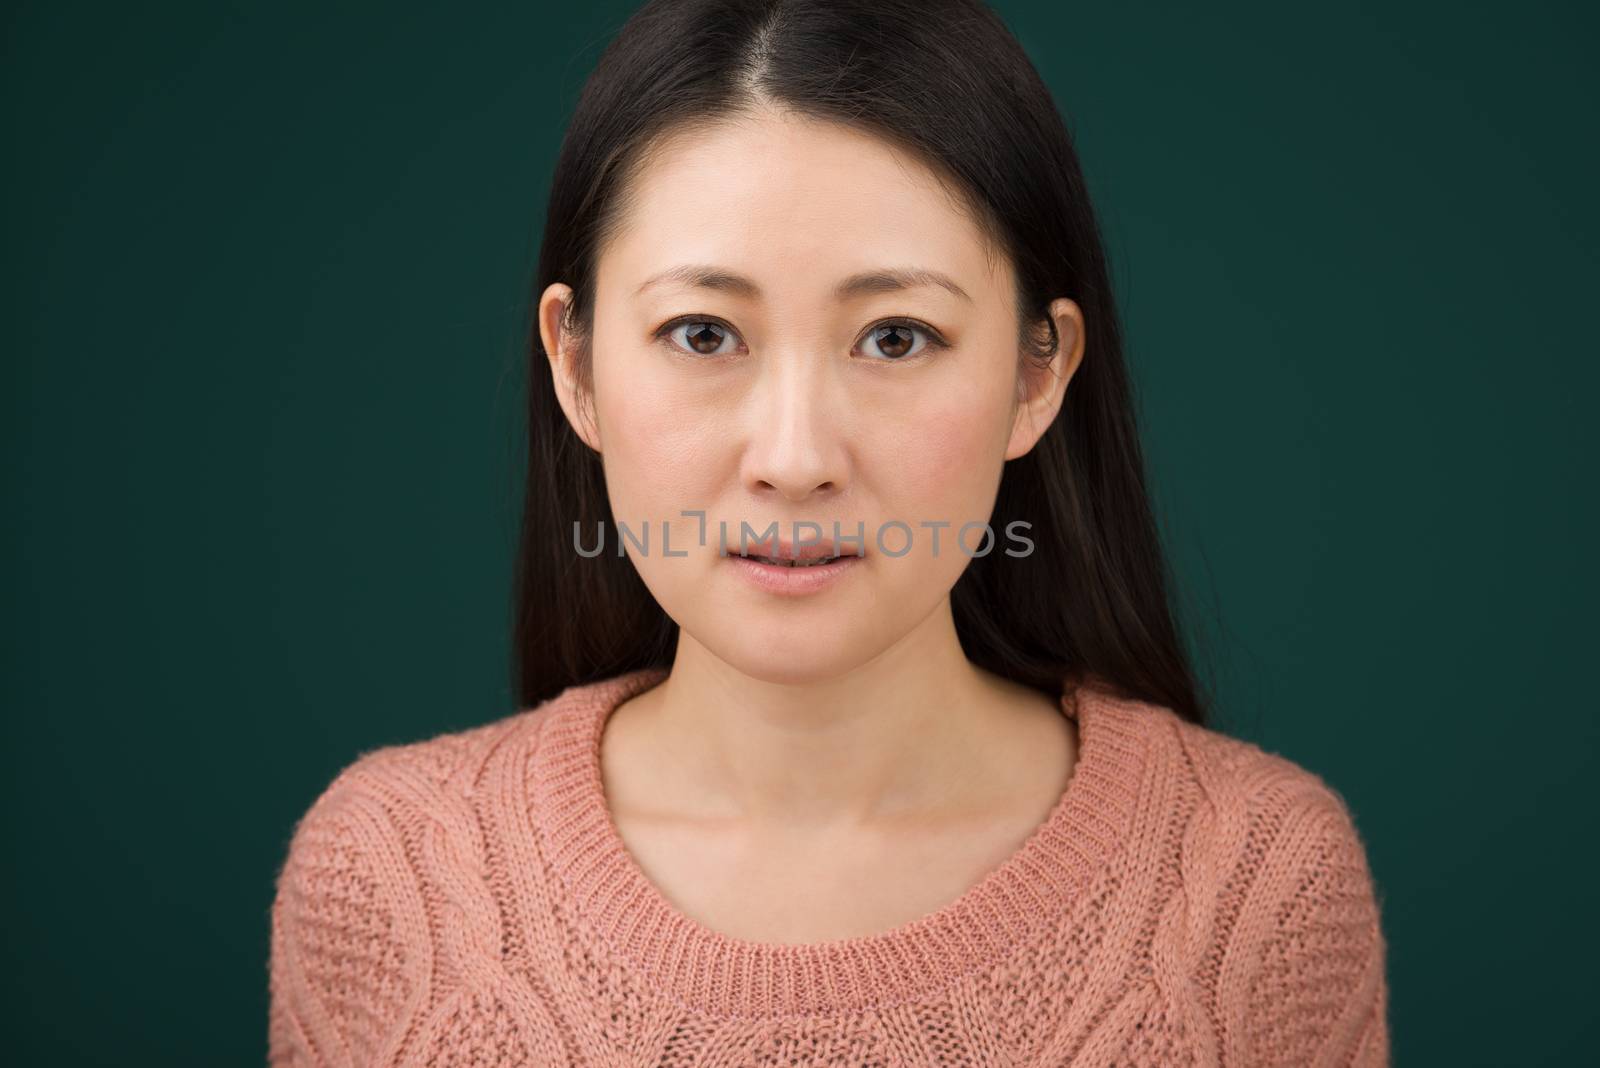 A headshot of a Japanese woman in hear early 30s on a simple green background.